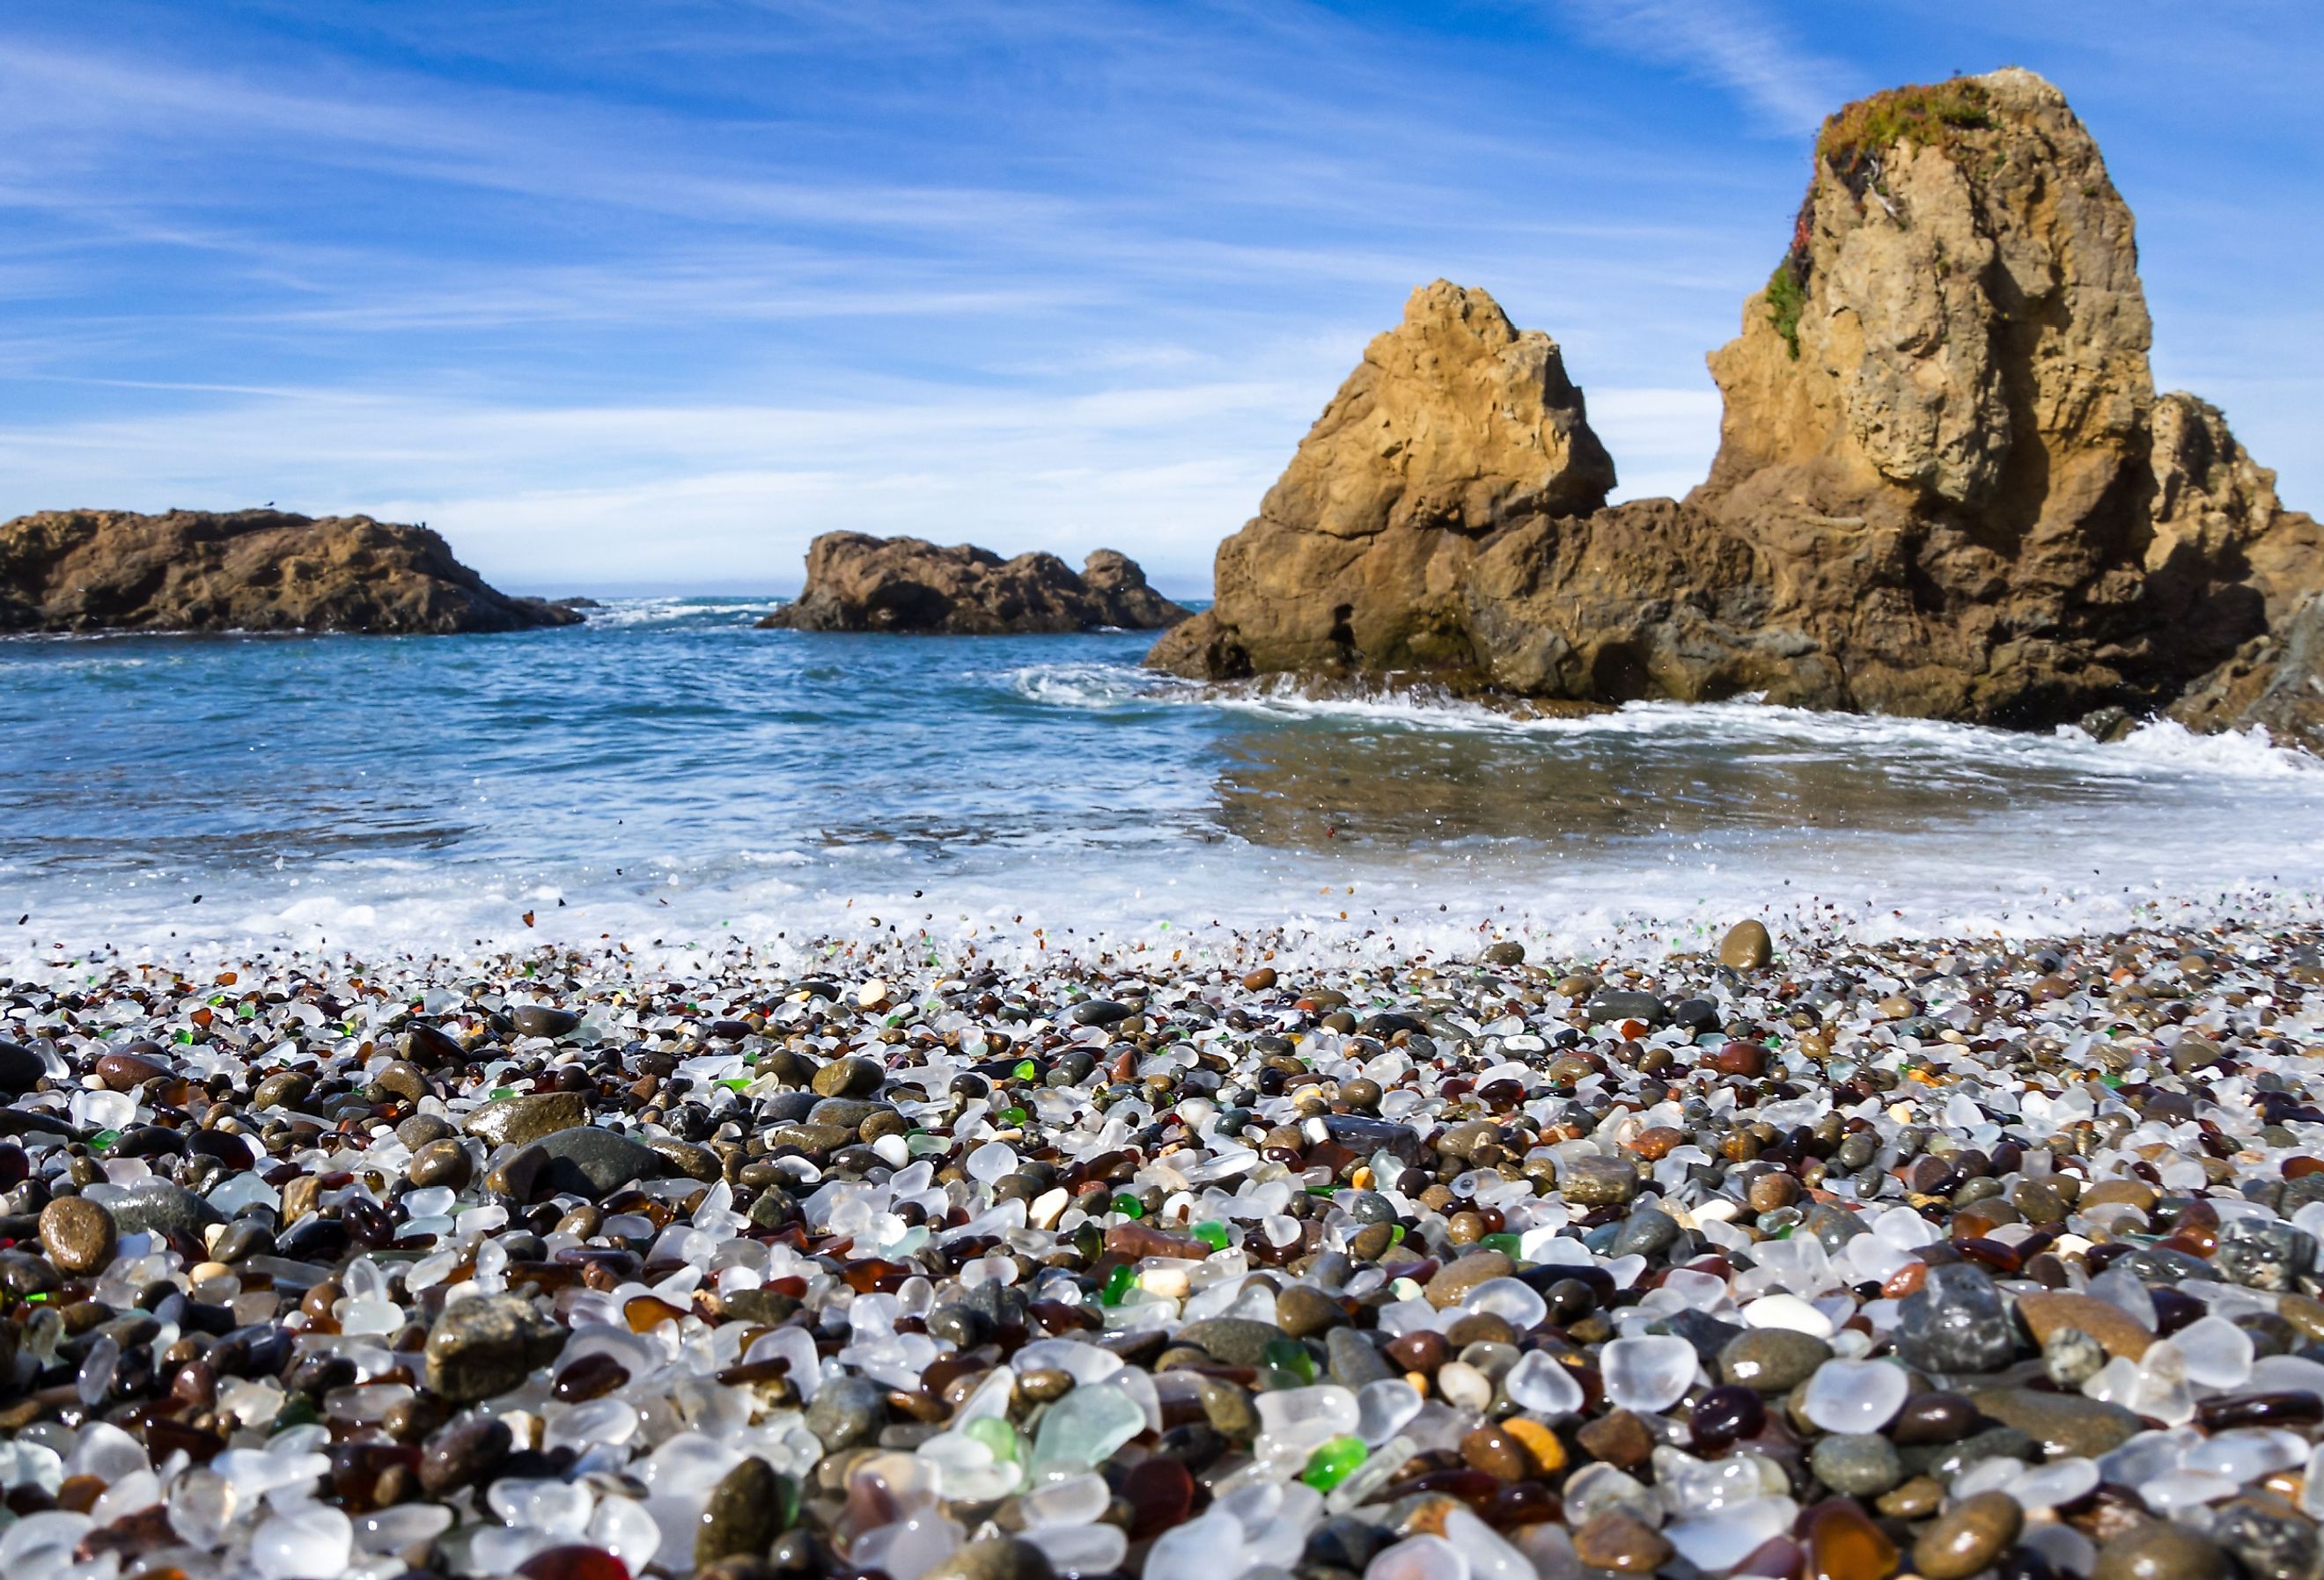 Colorful glass pebbles blanket this beach in Fort Bragg, California.